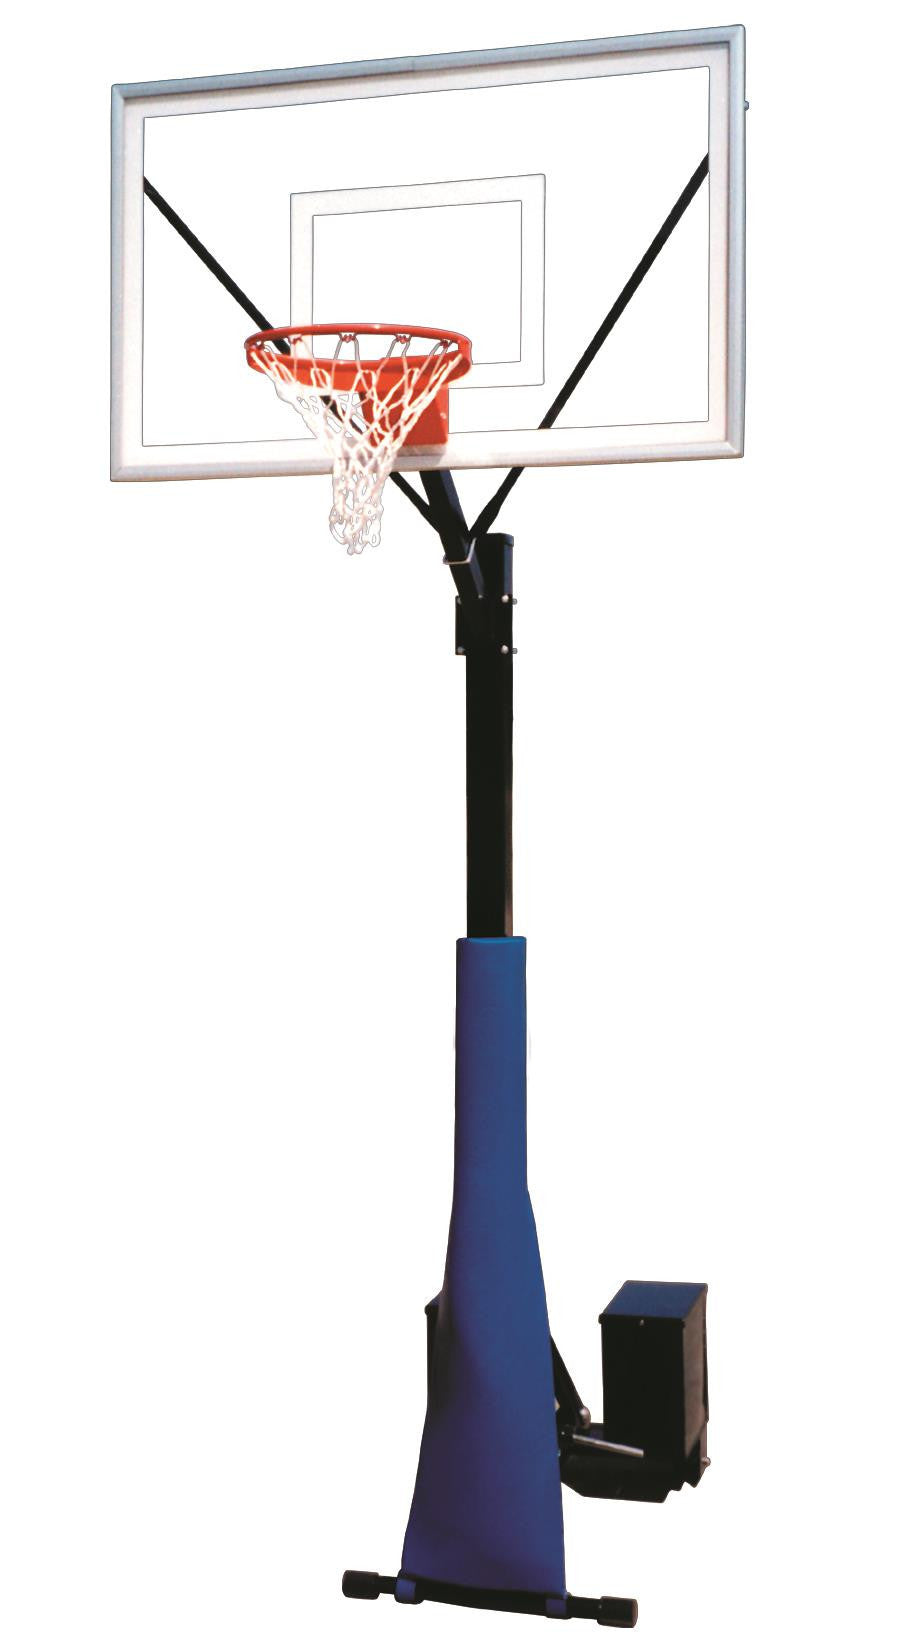 First Team Rolla Sport Select Portable Fixed Height Basketball Hoop 60 inch Acrylic